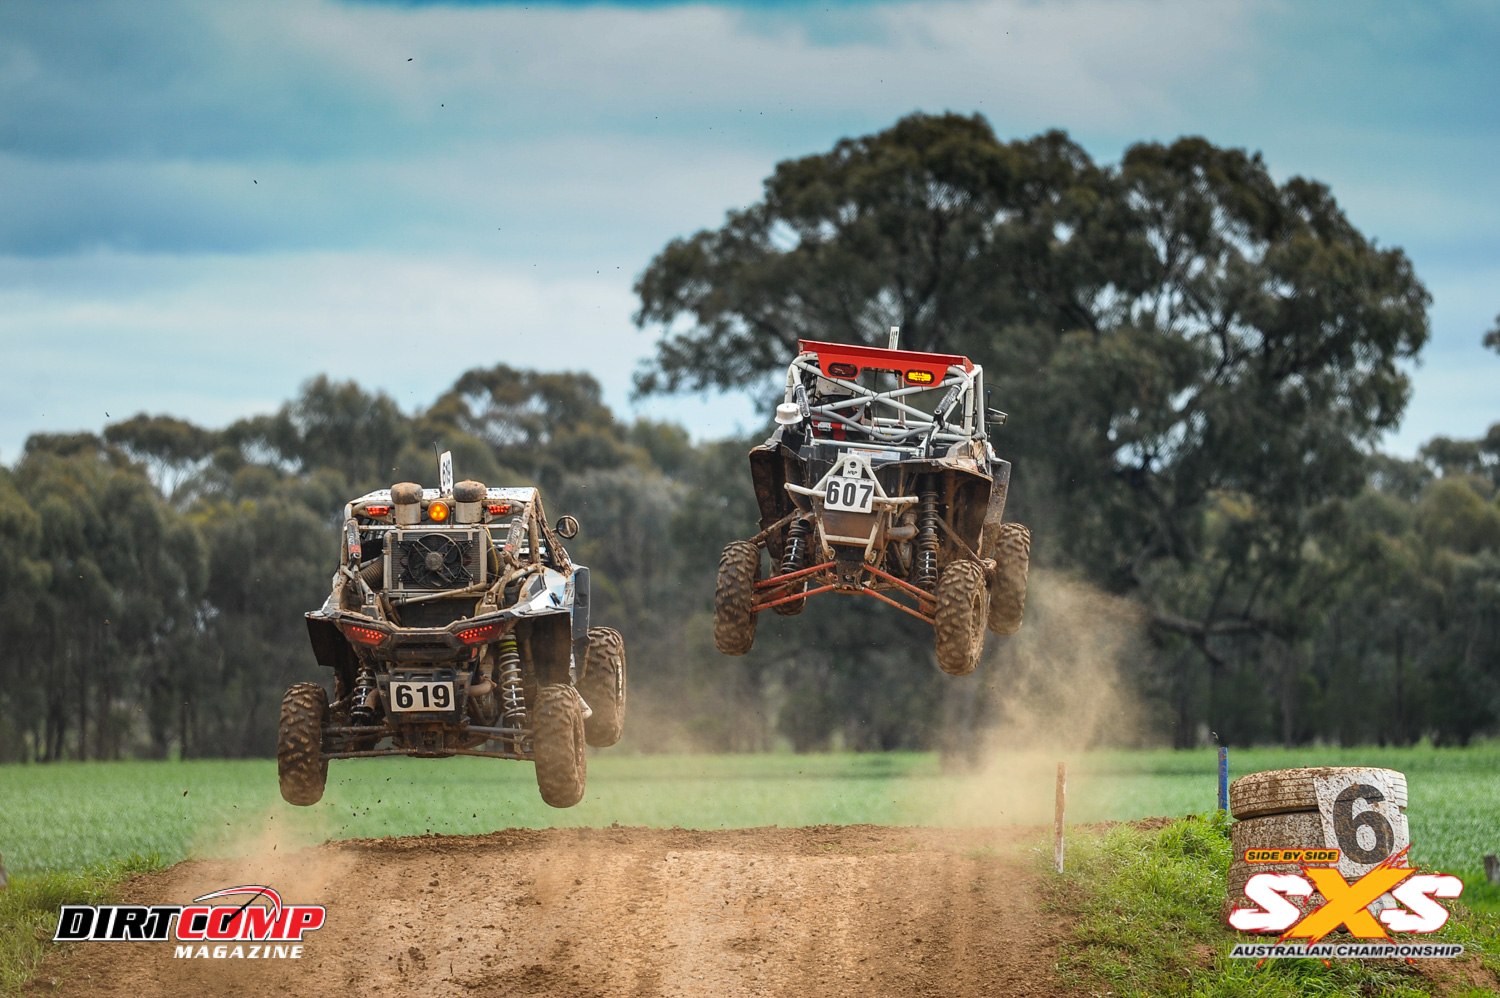 Crocker and Weissel going toe to toe in their Polaris RZR Turbo SXS's